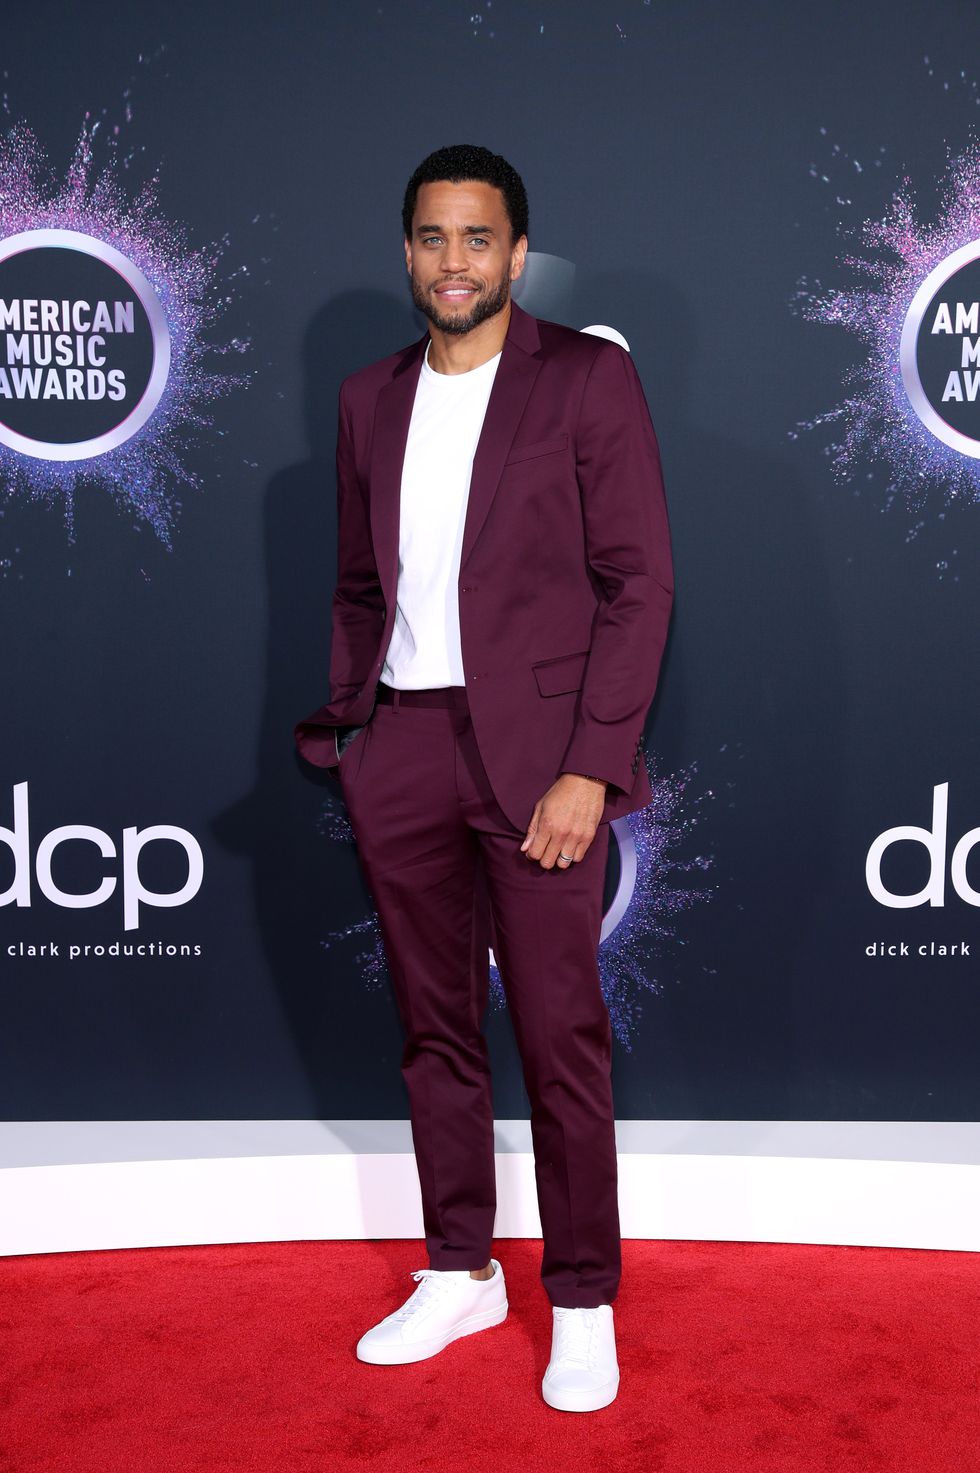 Michael Ealy at the 2019 American Music Awards - Arrivals 